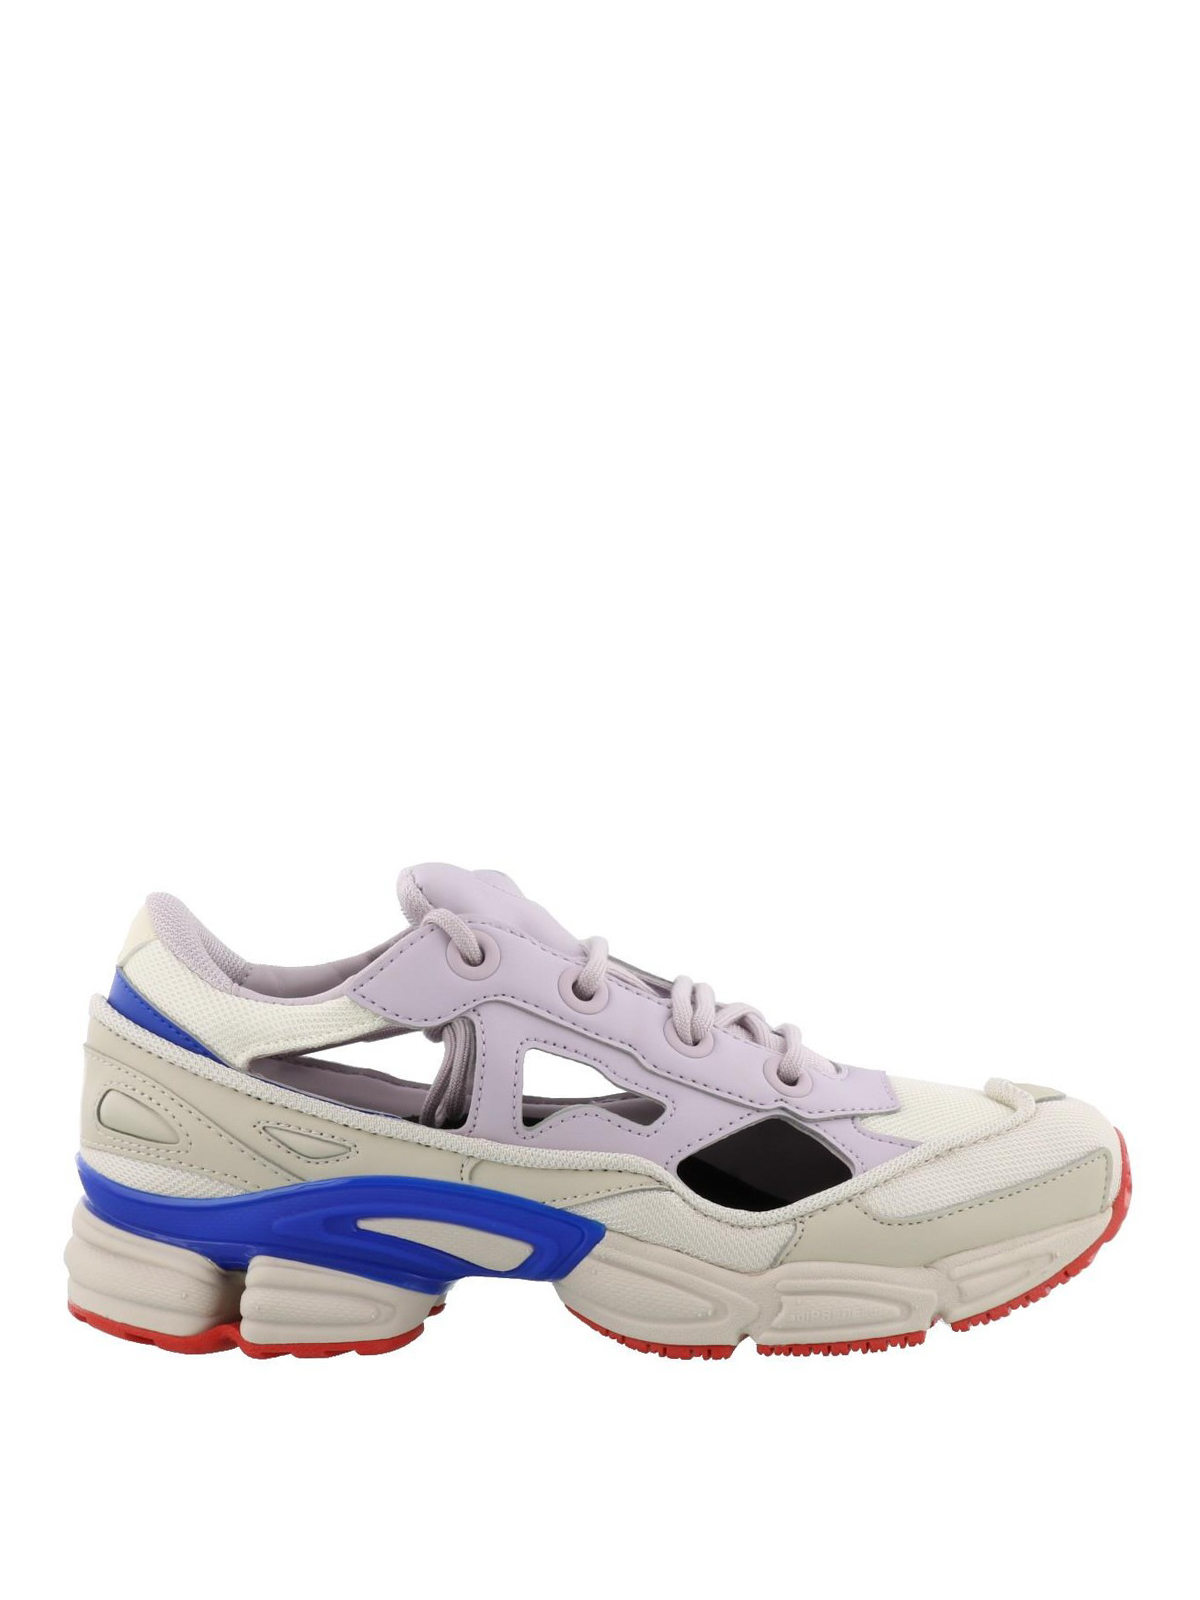 Trainers Raf Simons Adidas - Rs Replicant Ozweego cut out sneakers